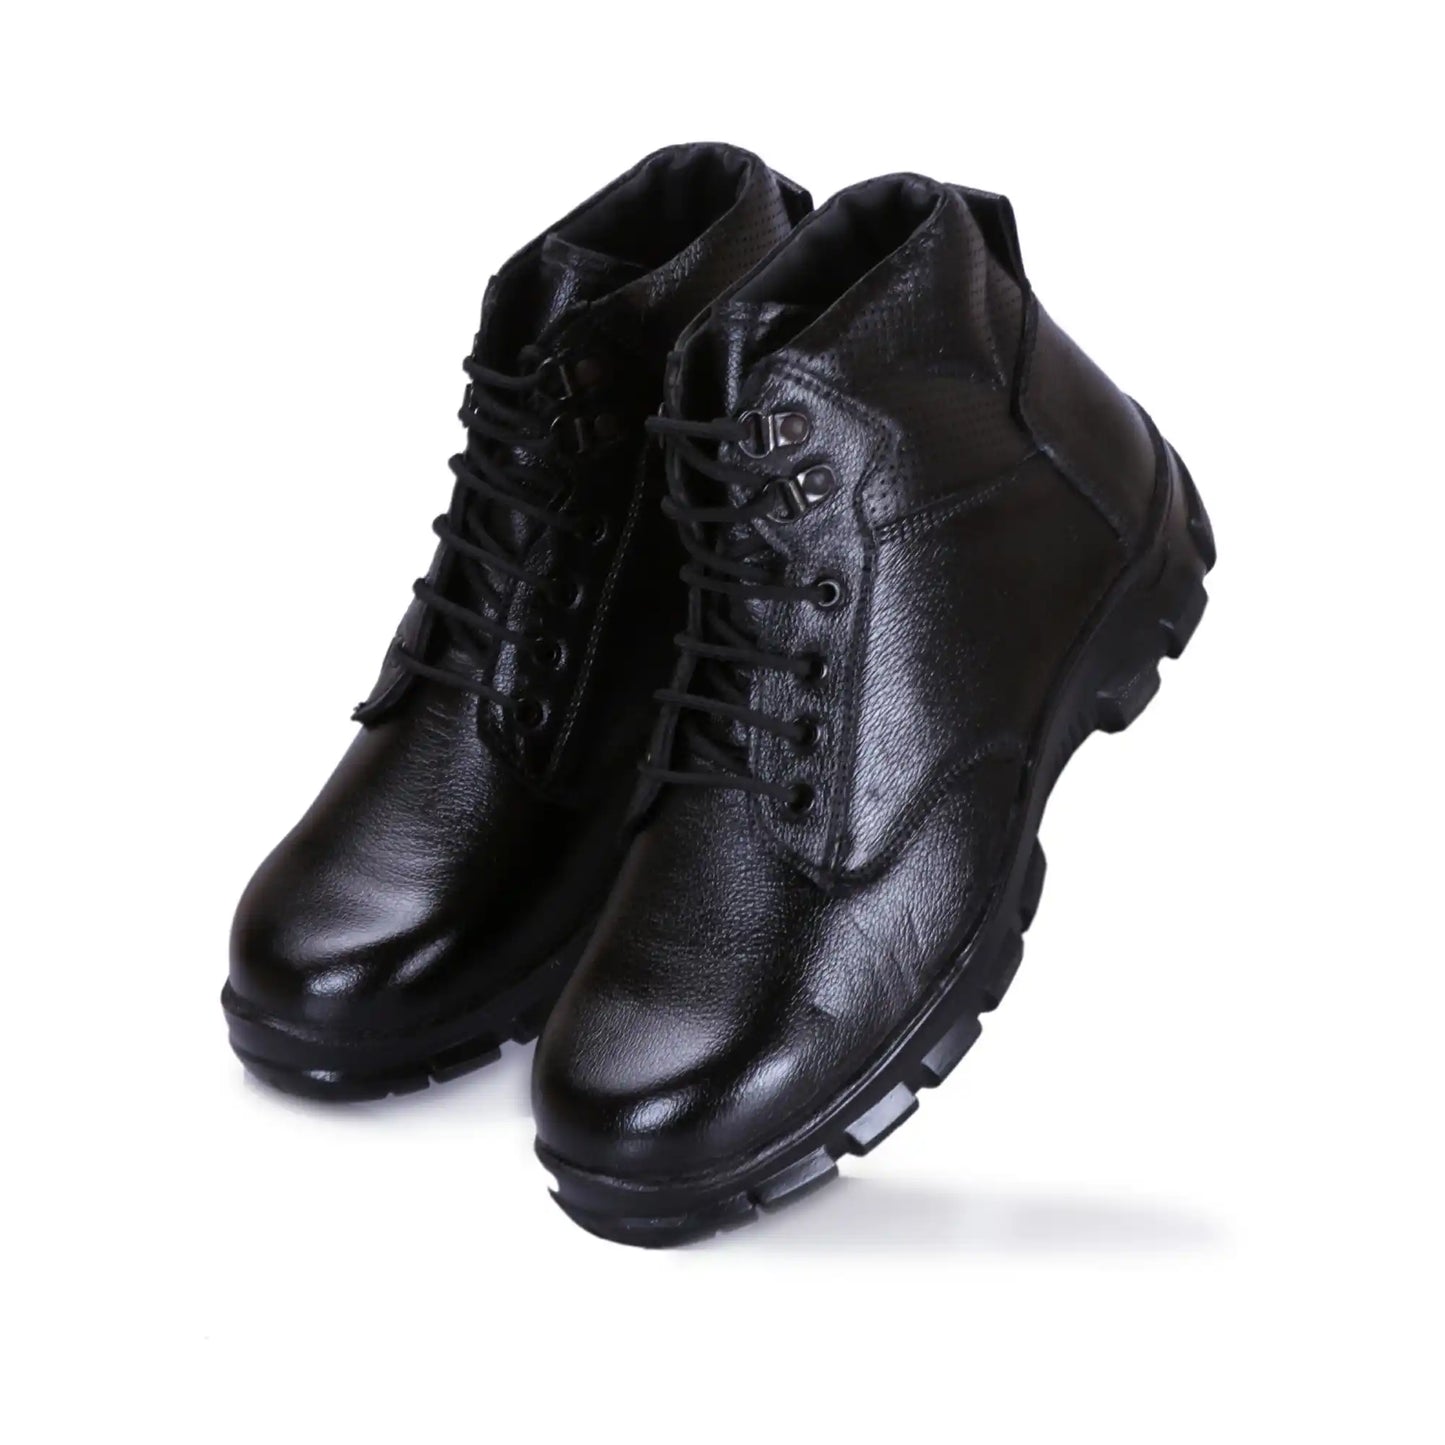 Pure Leather Safety Shoes Industrial Boots for Men